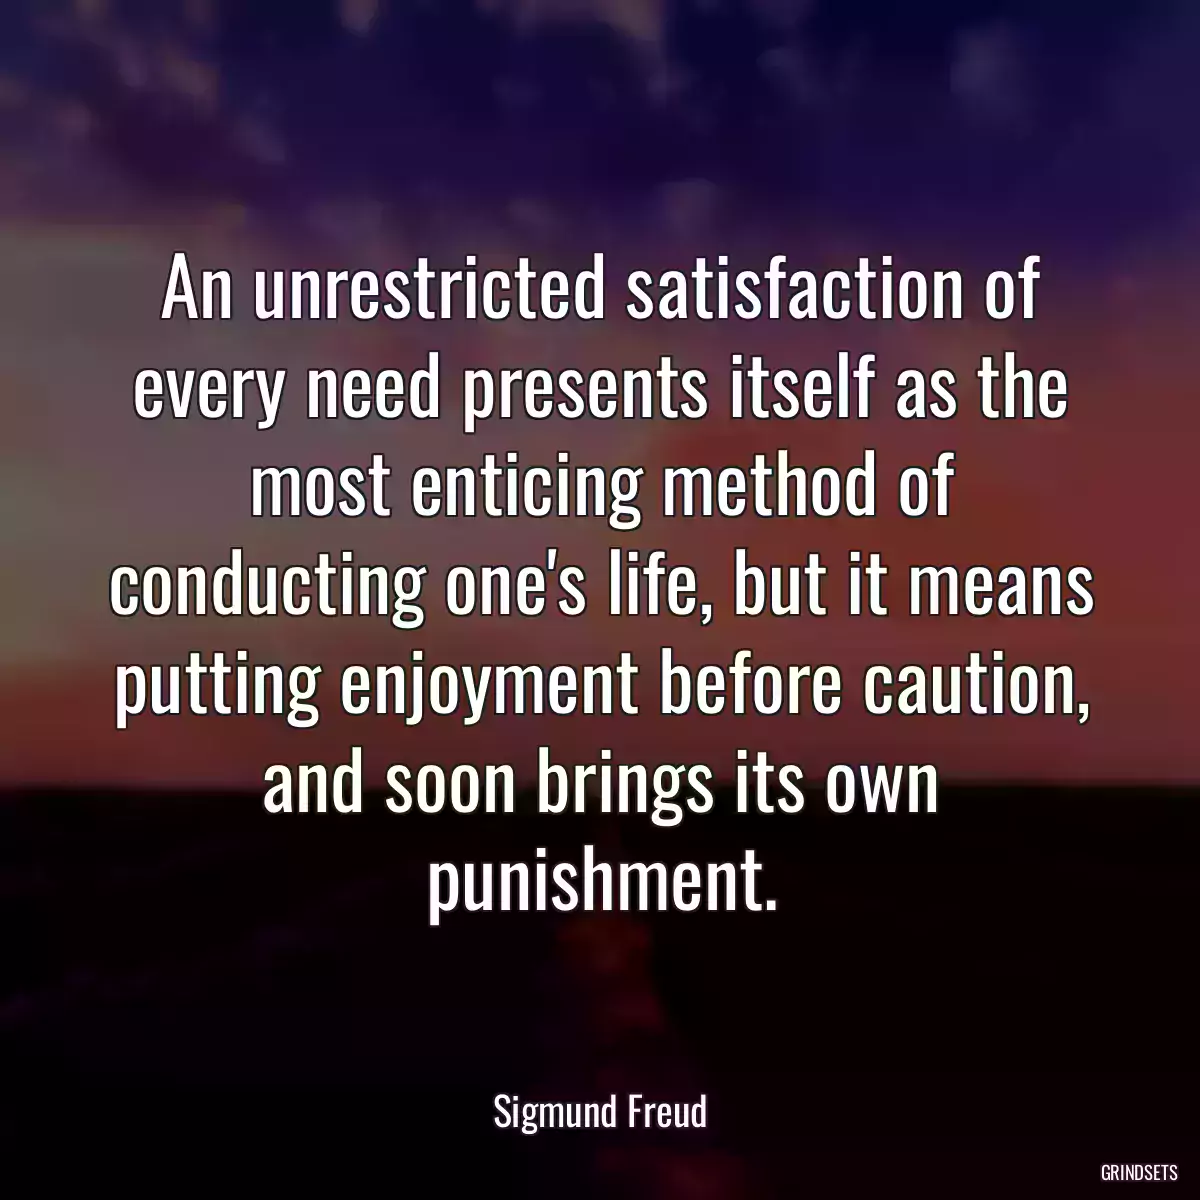 An unrestricted satisfaction of every need presents itself as the most enticing method of conducting one\'s life, but it means putting enjoyment before caution, and soon brings its own punishment.